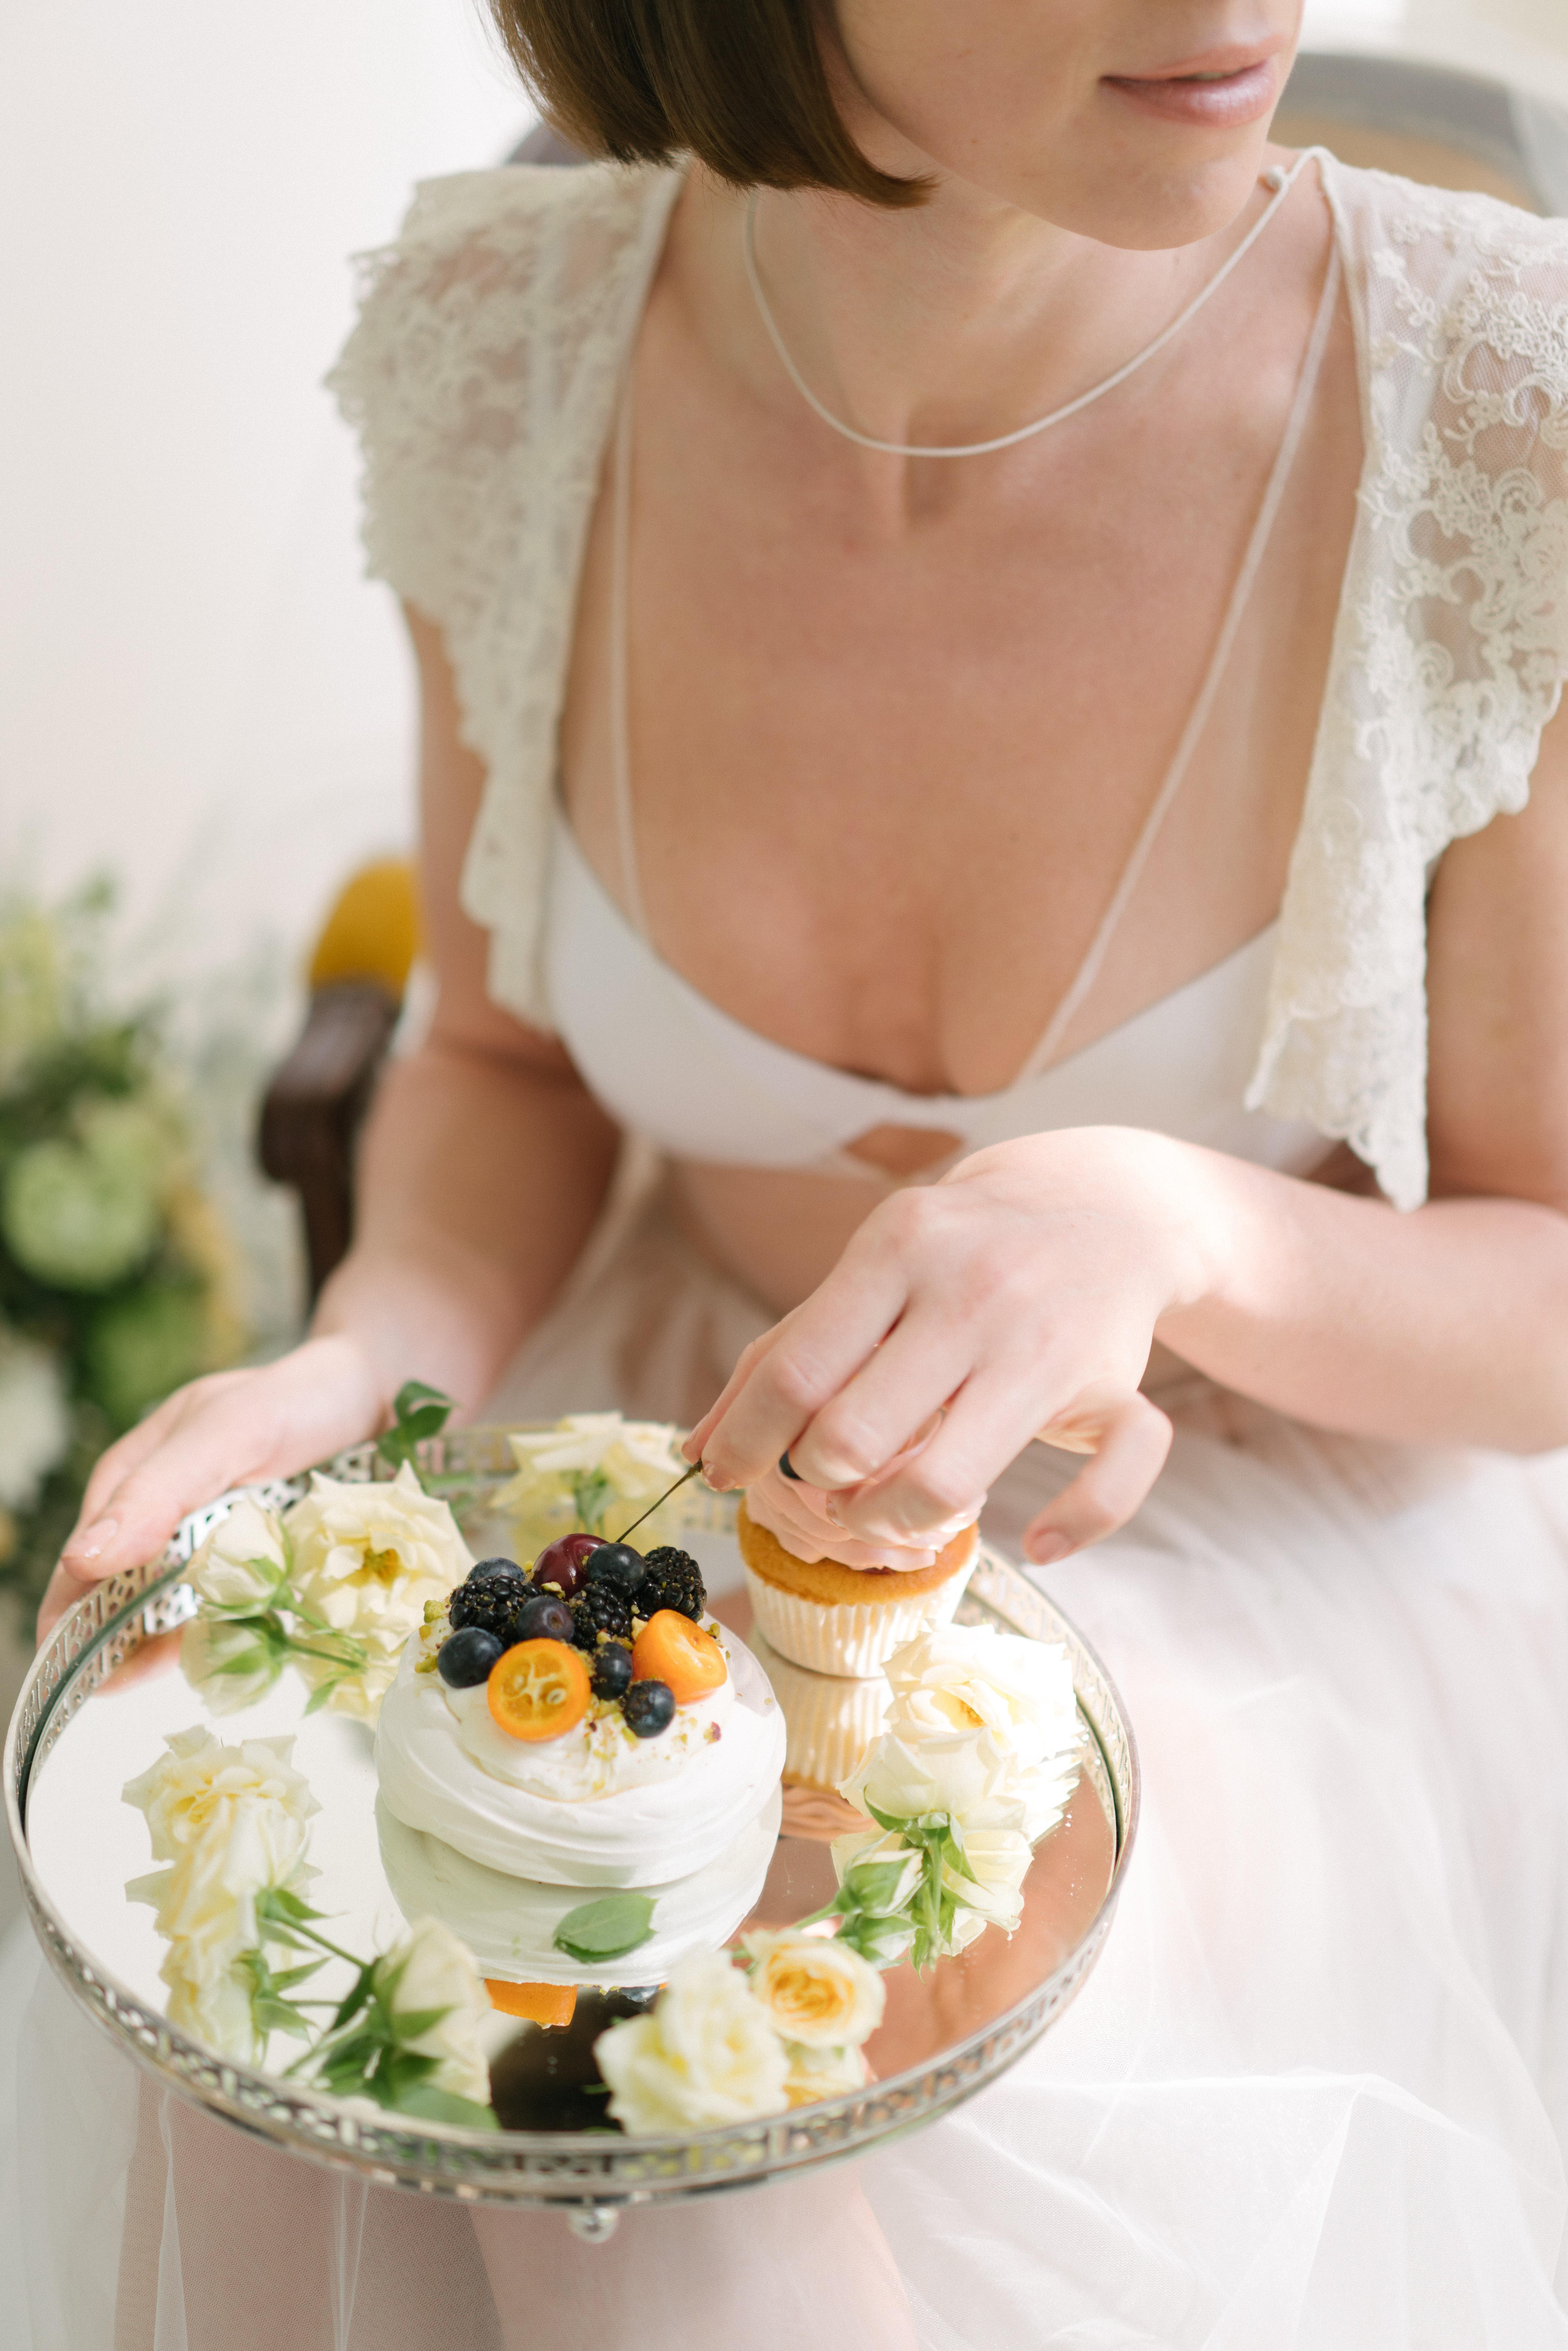 Bride holding silver plate of wedding catering desserts